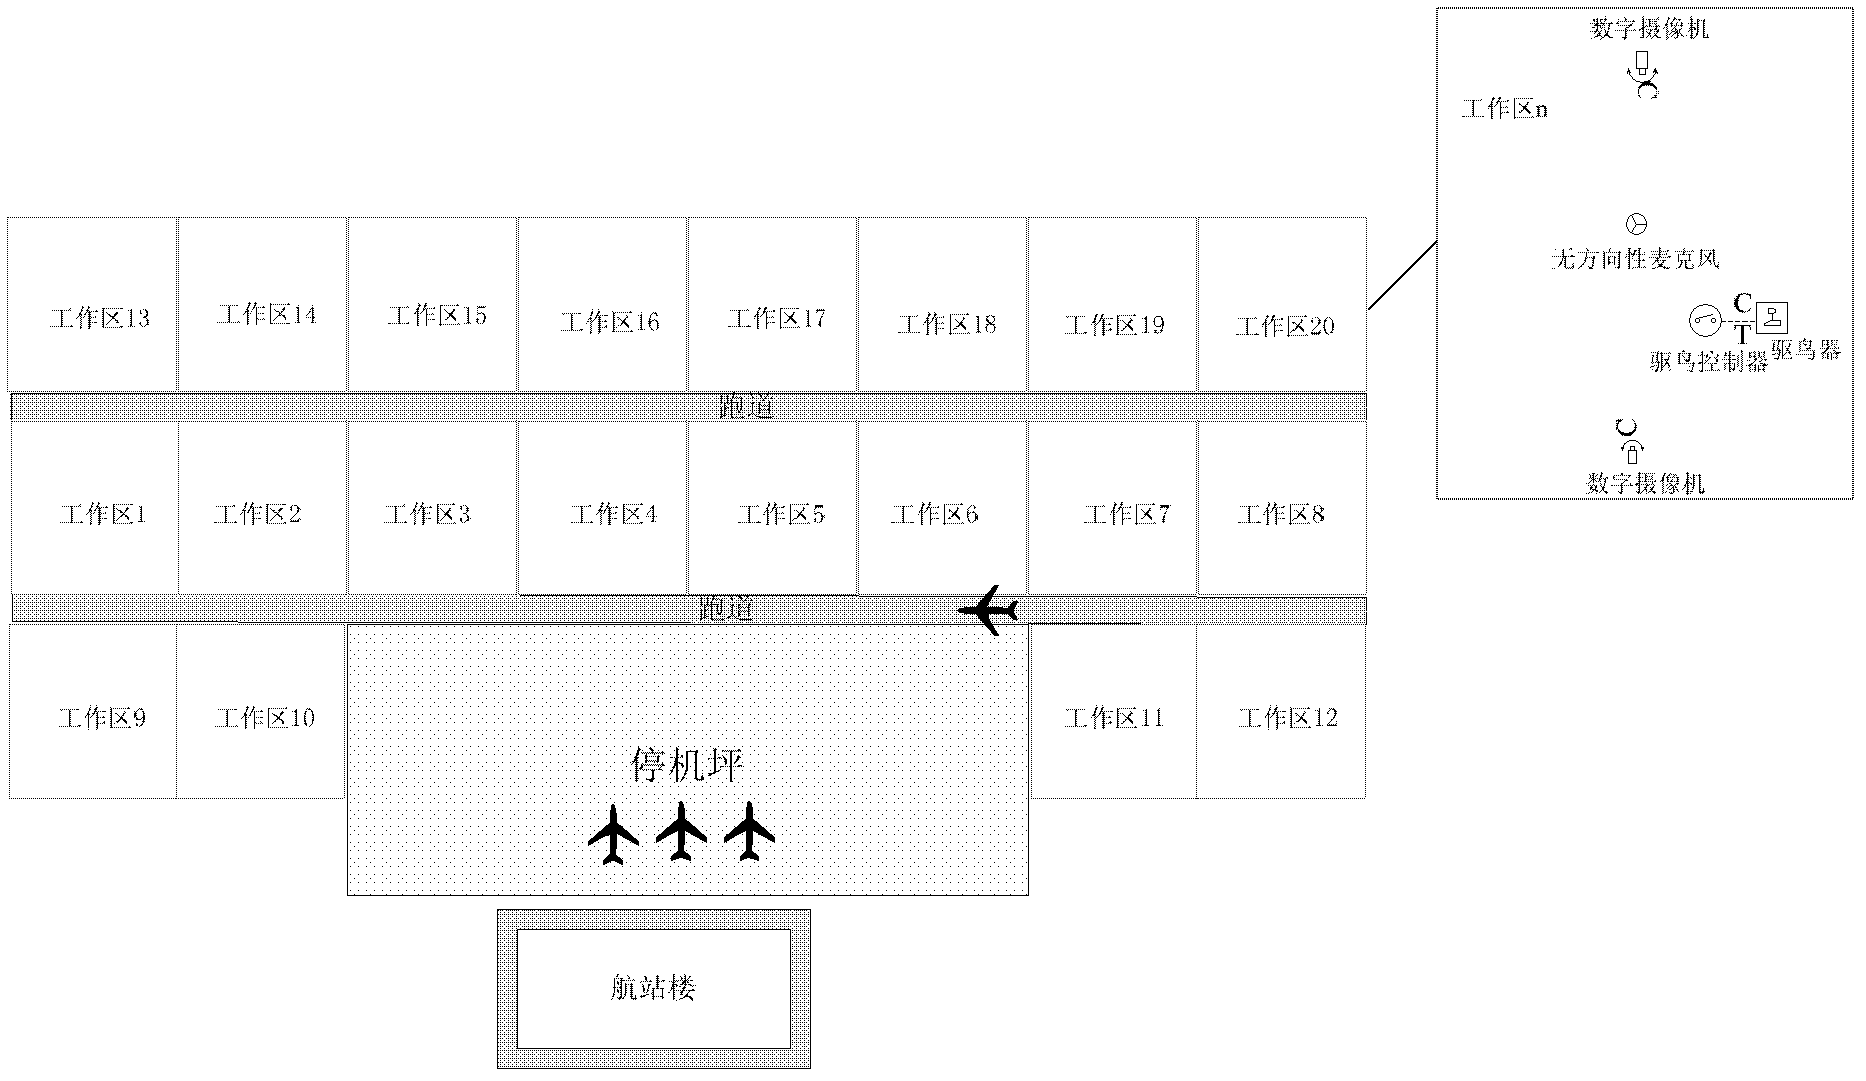 Bird-dispersing system and method for monitoring bird situations of airports